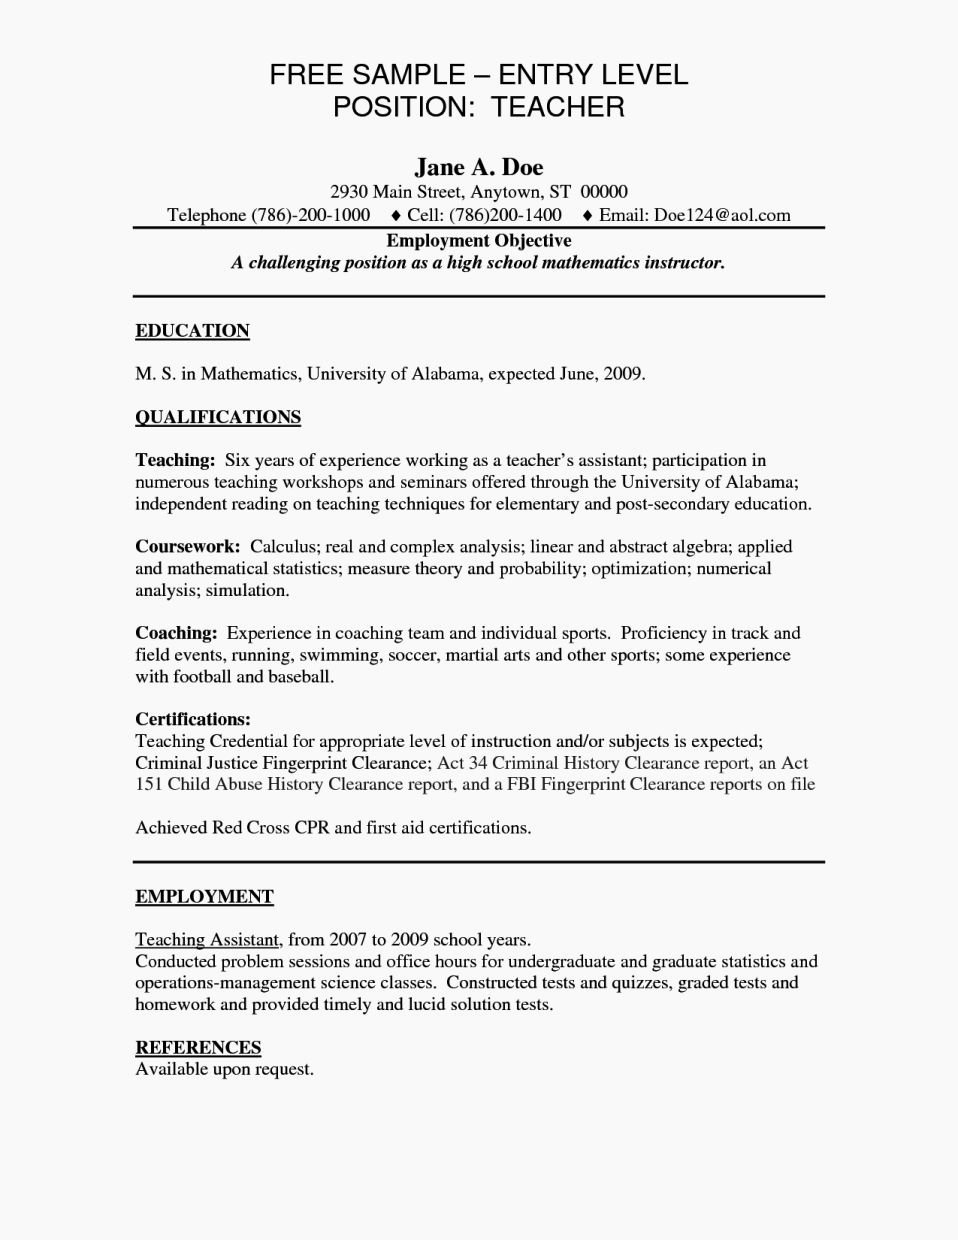 Examples Resumes for Entry Level Jobs